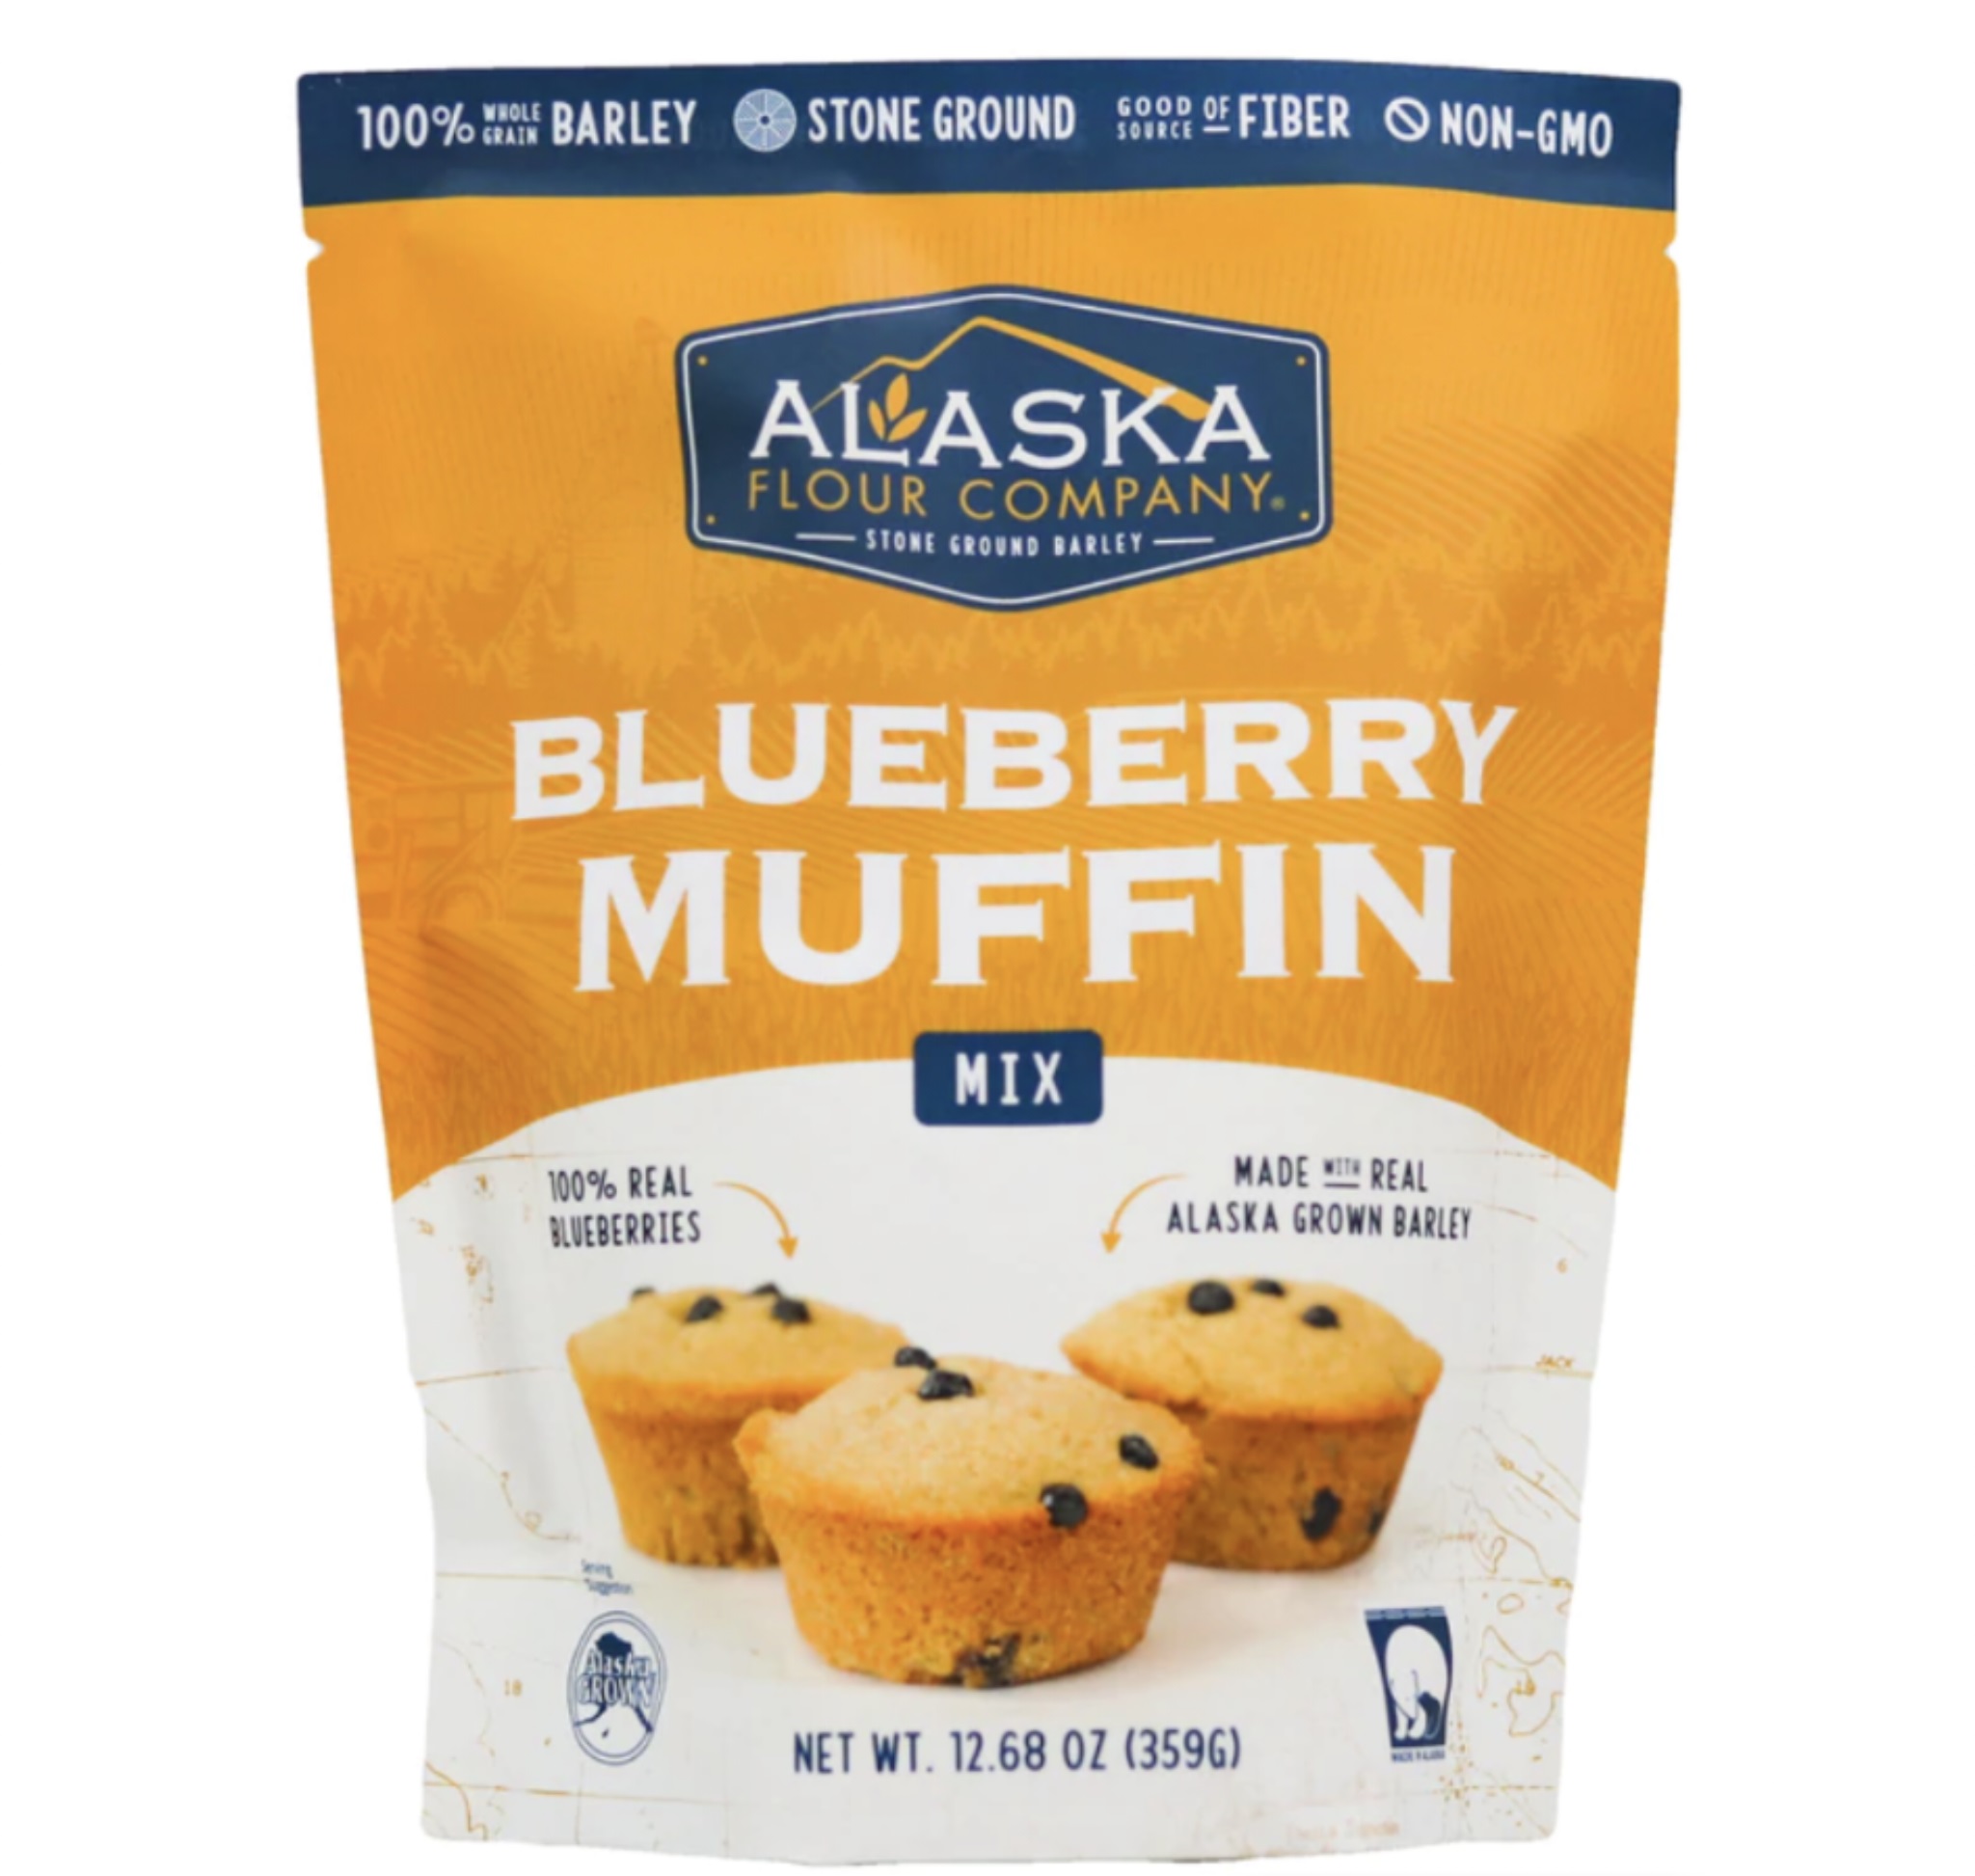 Muffin Mix Blueberry 6/5lb AK Flour Company - Sold by EA